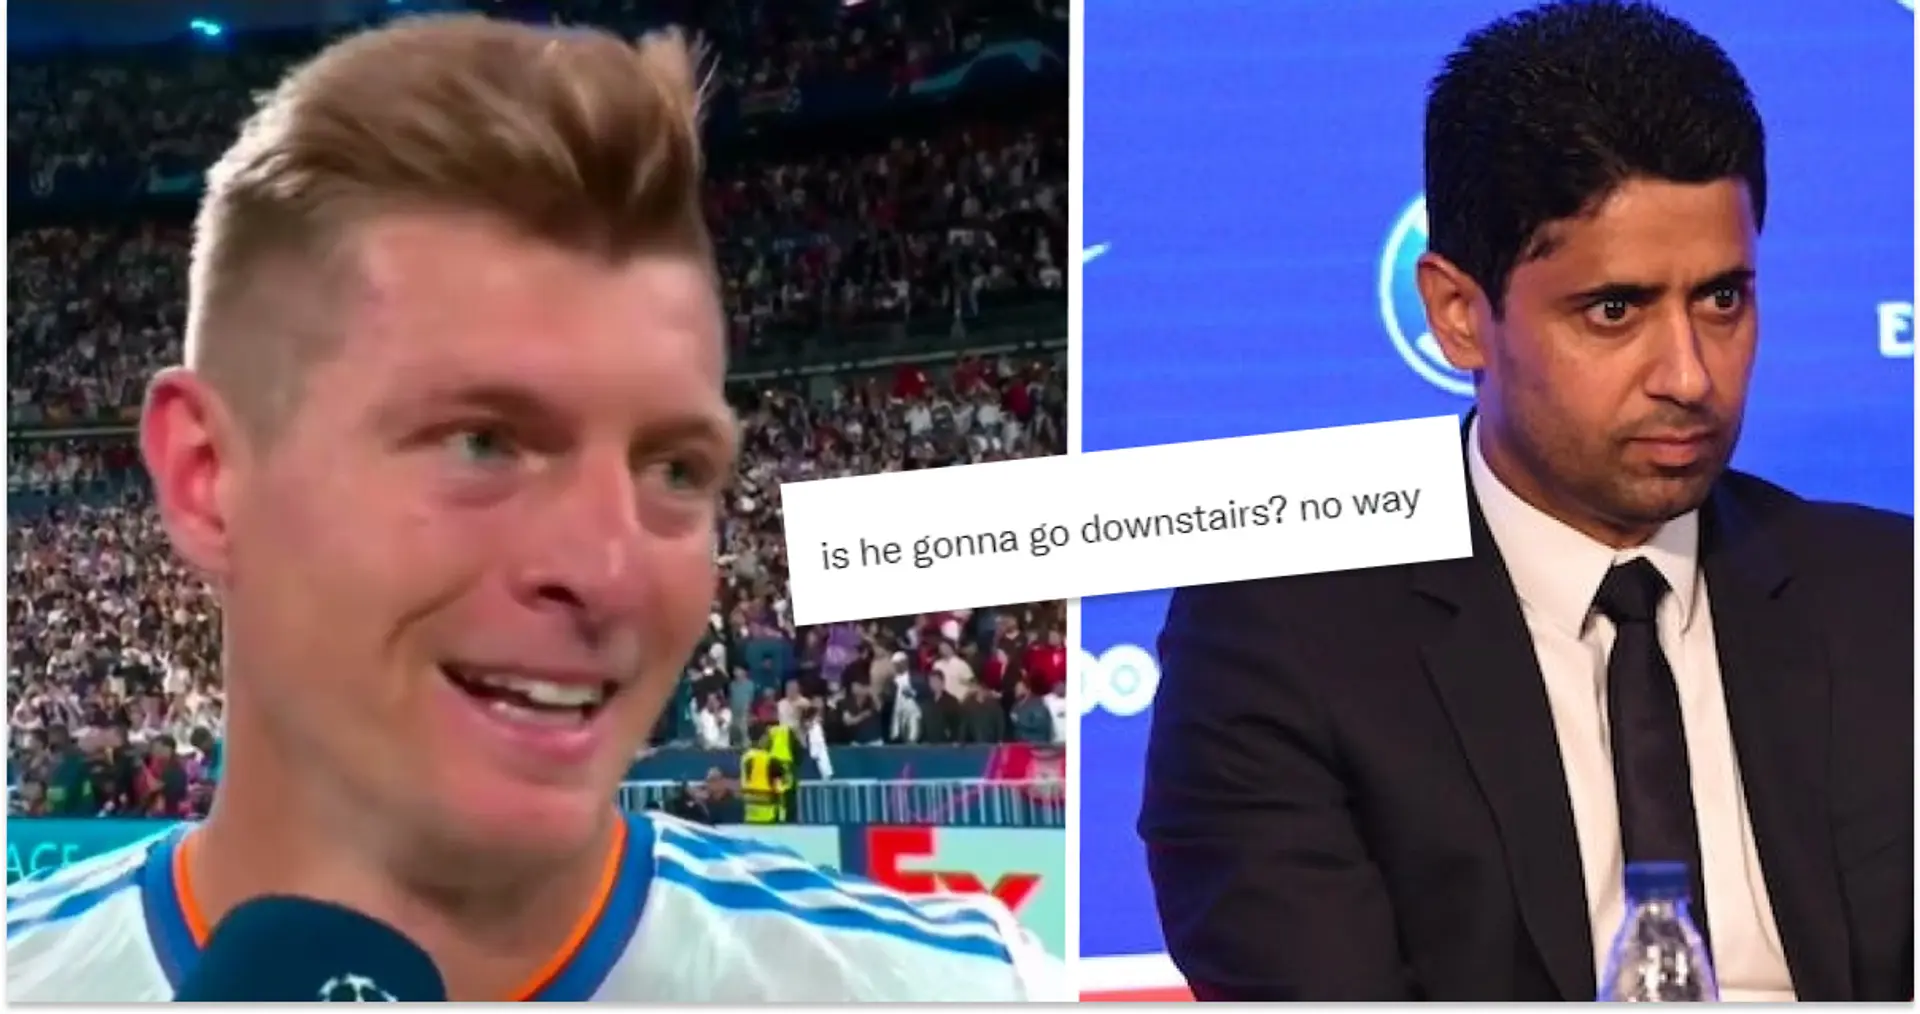 'So desperate to copy our success': Madrid fans aim dig at PSG after rumours of €100m offer to Kroos emerge